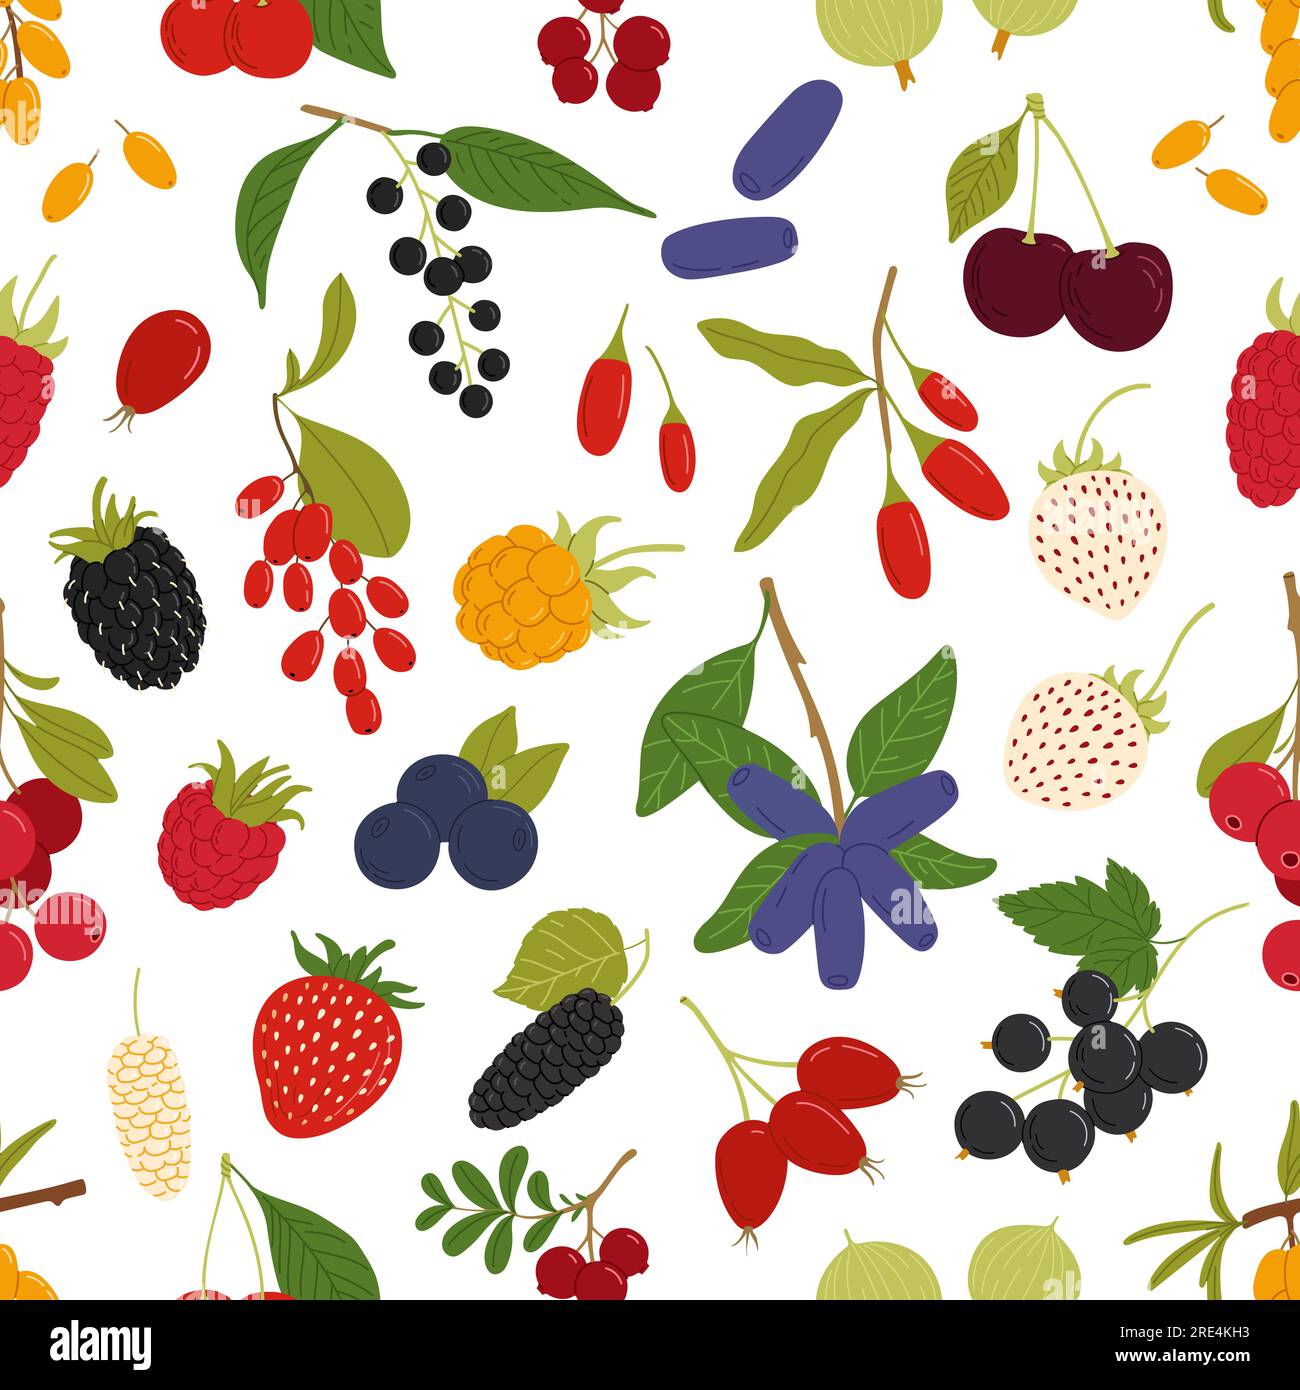 Organic ripe berries seamless pattern, strawberry, raspberry and blueberry fruits, vector background. Cherry, blackberry and bird cherry with gooseberry, cranberry, blackcurrant and redcurrant pattern Stock Vector